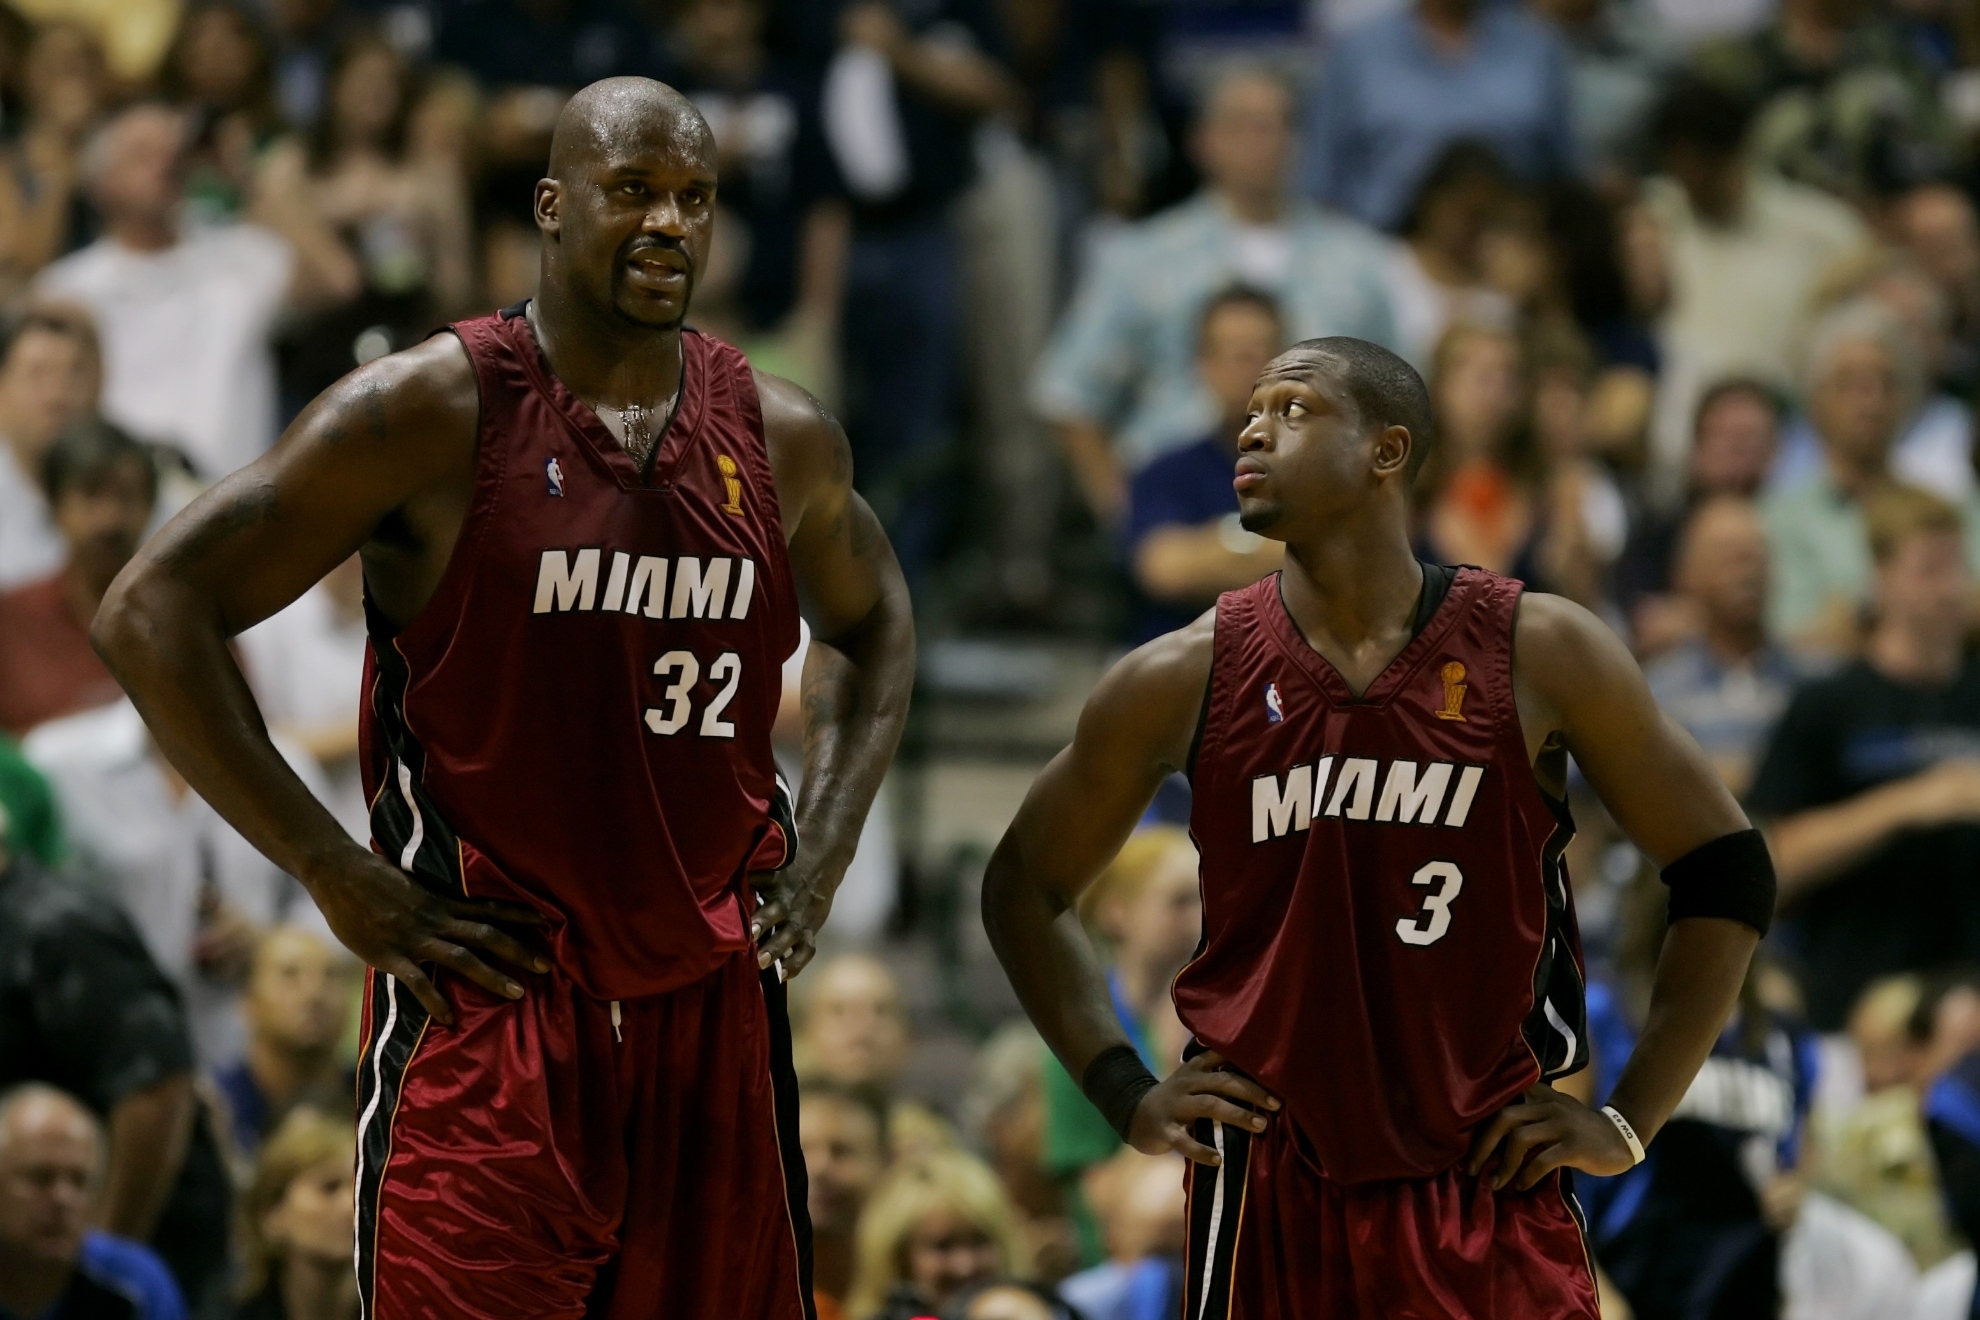 Dwyane Wade and Shaquille O'Neal playing for the Heat.